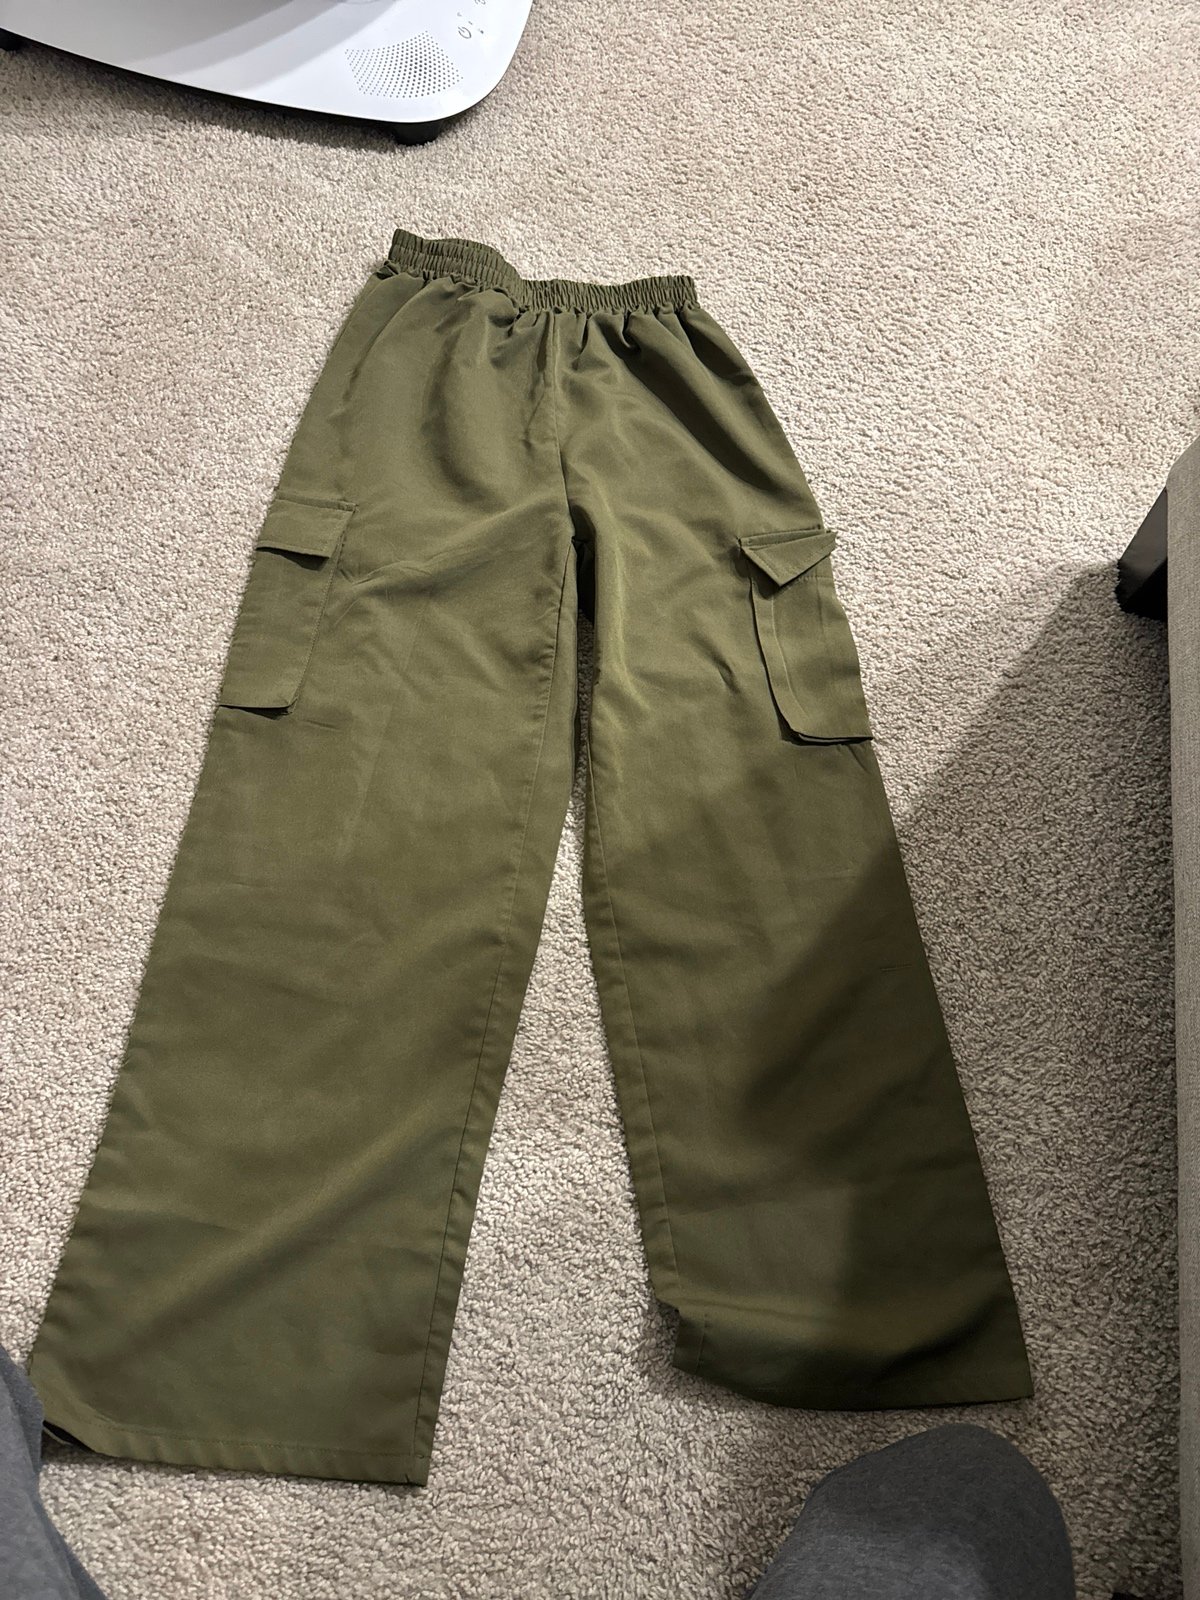 reasonable price womens cargo pants jAupR764o Online Exclusive